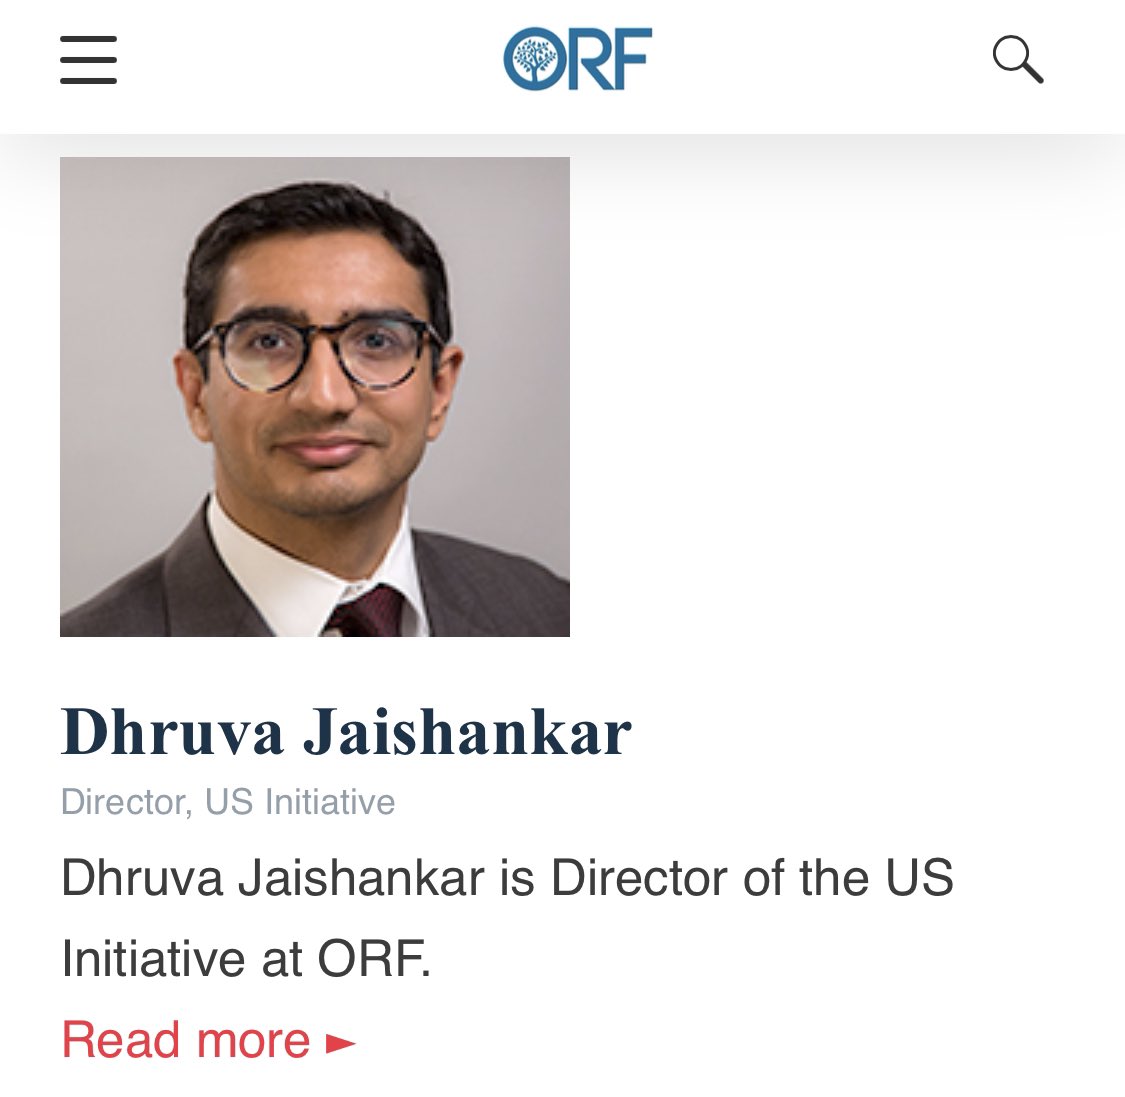 Latest Indian propaganda outfits setup as ThinkTanks areGlobal Counter Terrorism Council-GCTC&Observers Research Foundation-ORF to lobby western public opinion against PakistanHeaded by Indian Foreign Min S. Jaishankar’s son Dhruva&X Chief Indian intel R&AW Vikram Sood/8